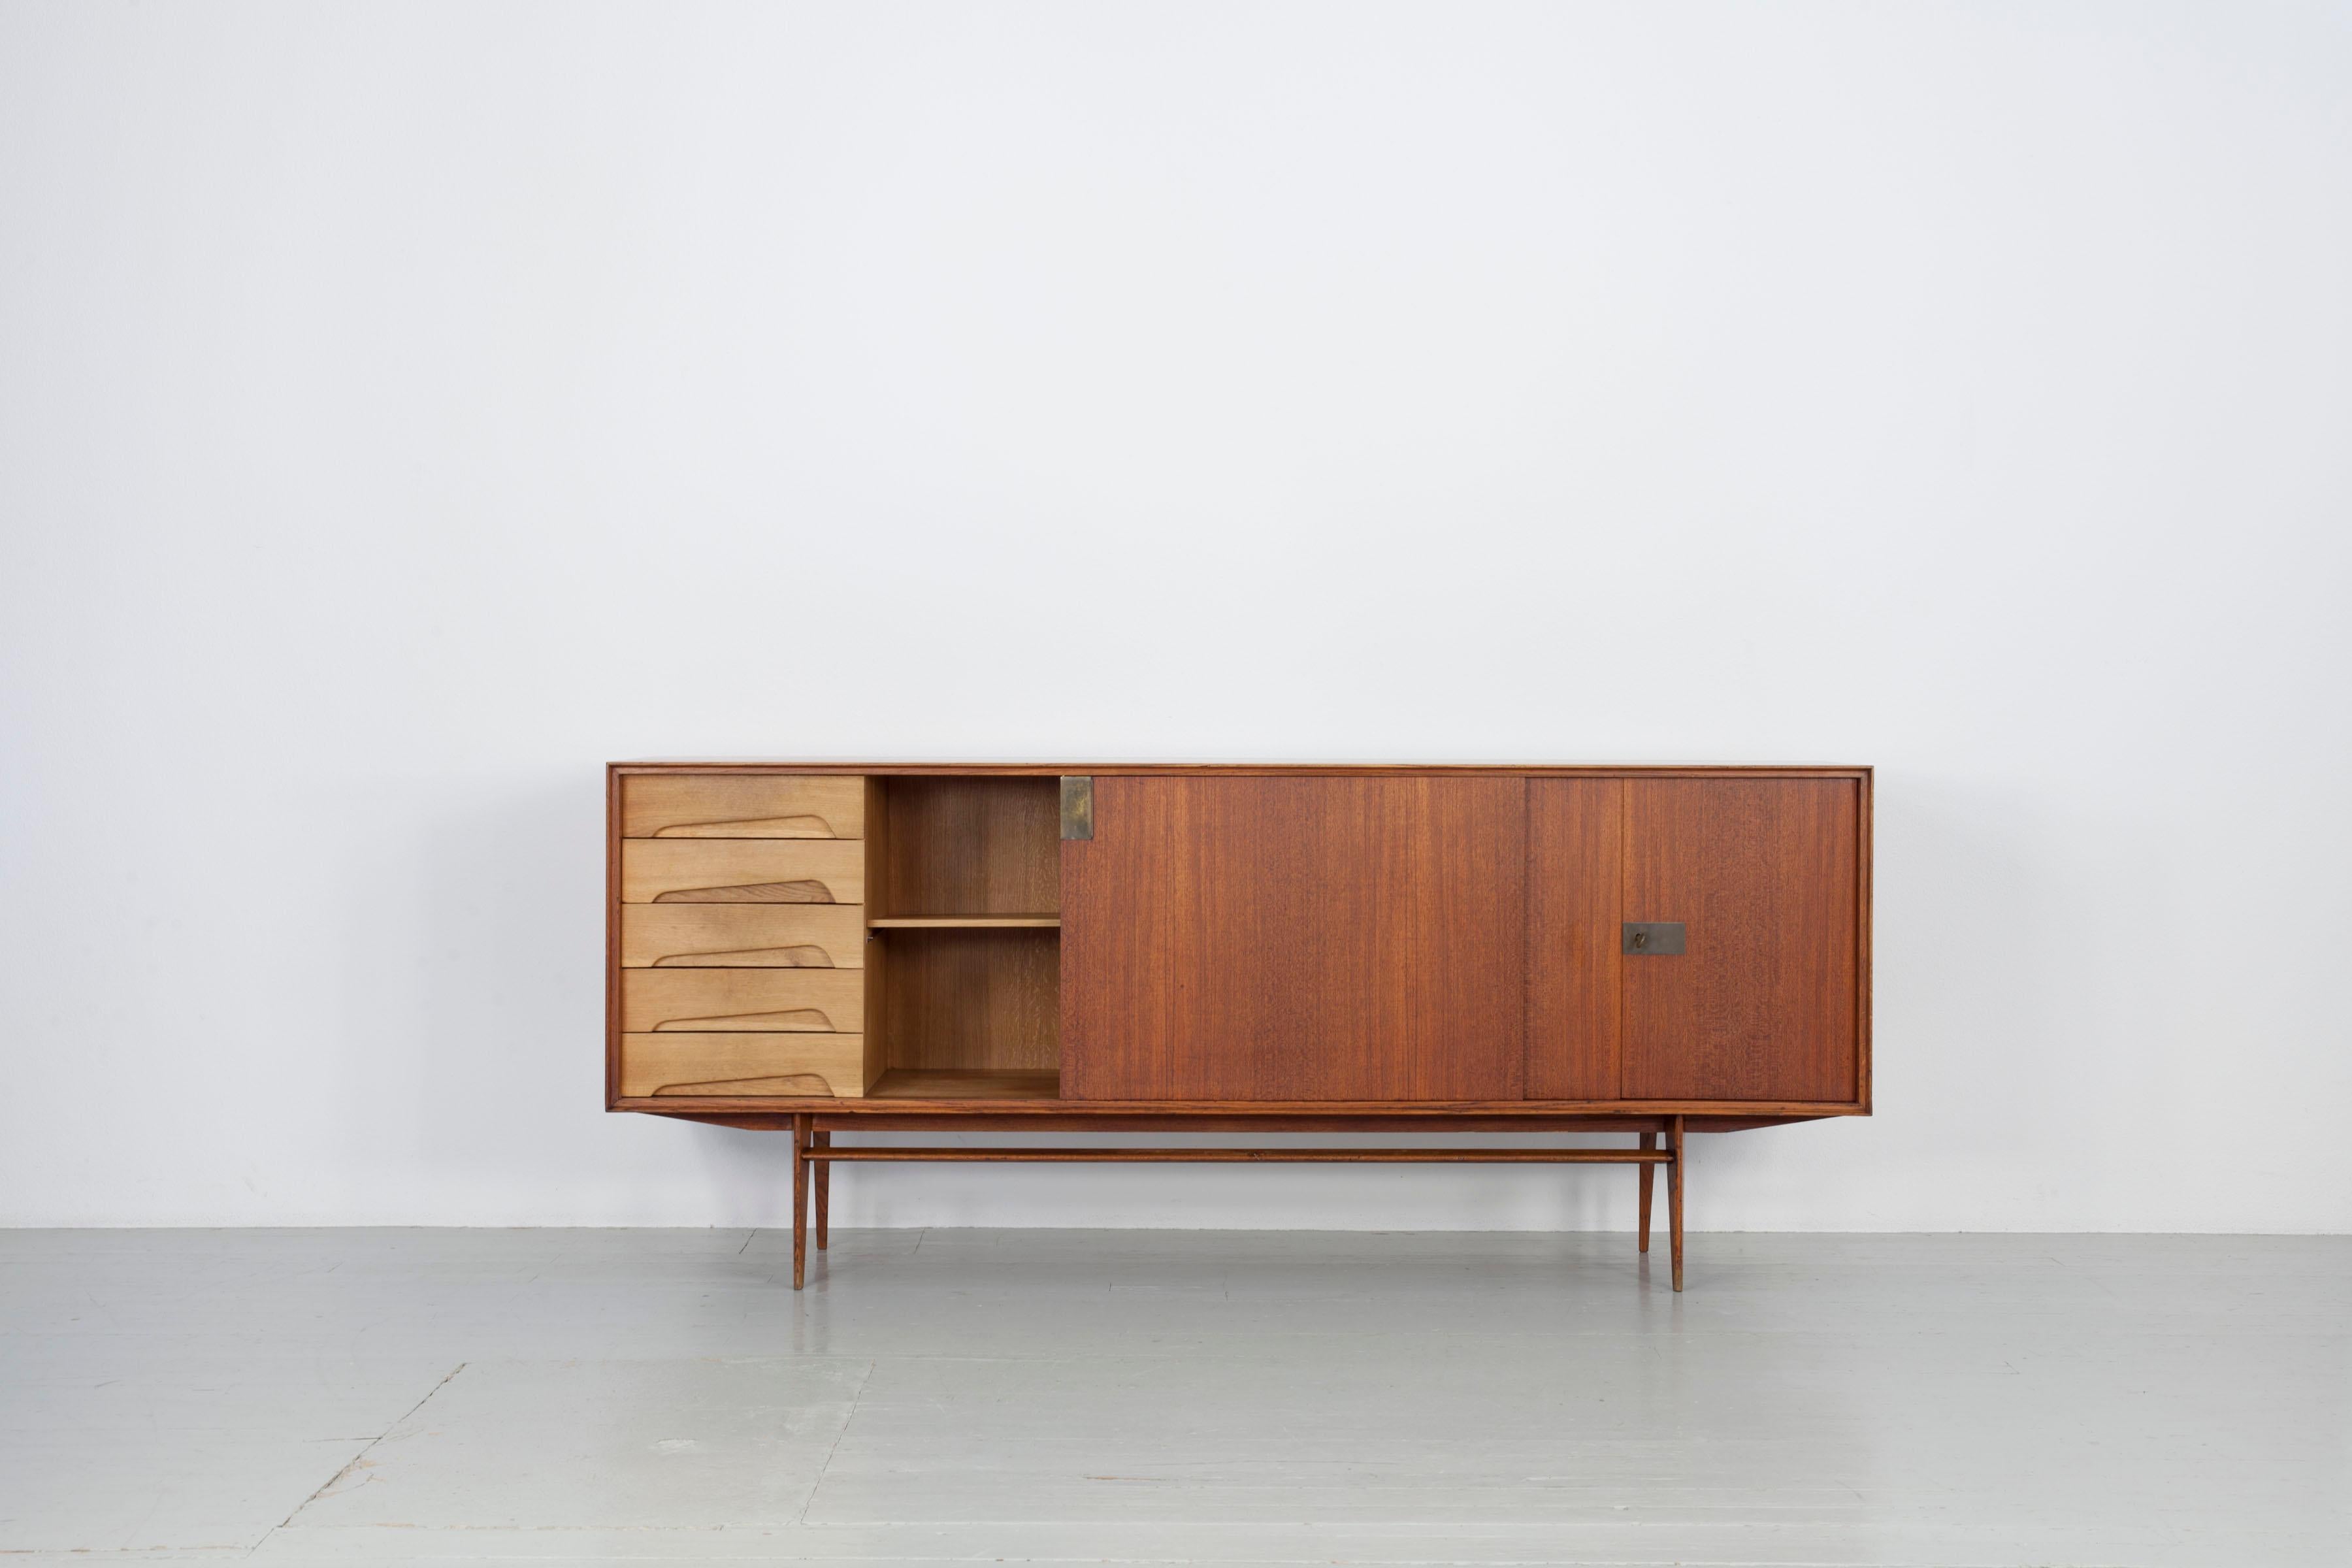 This sideboard was made with teak and brass details. The versatile sideboard offers plenty of storage space and is in very good vintage condition. Edmondo Palutari worked in-house at Dassi Mobili Moderni (DMM) in the 1950s, designing a successful